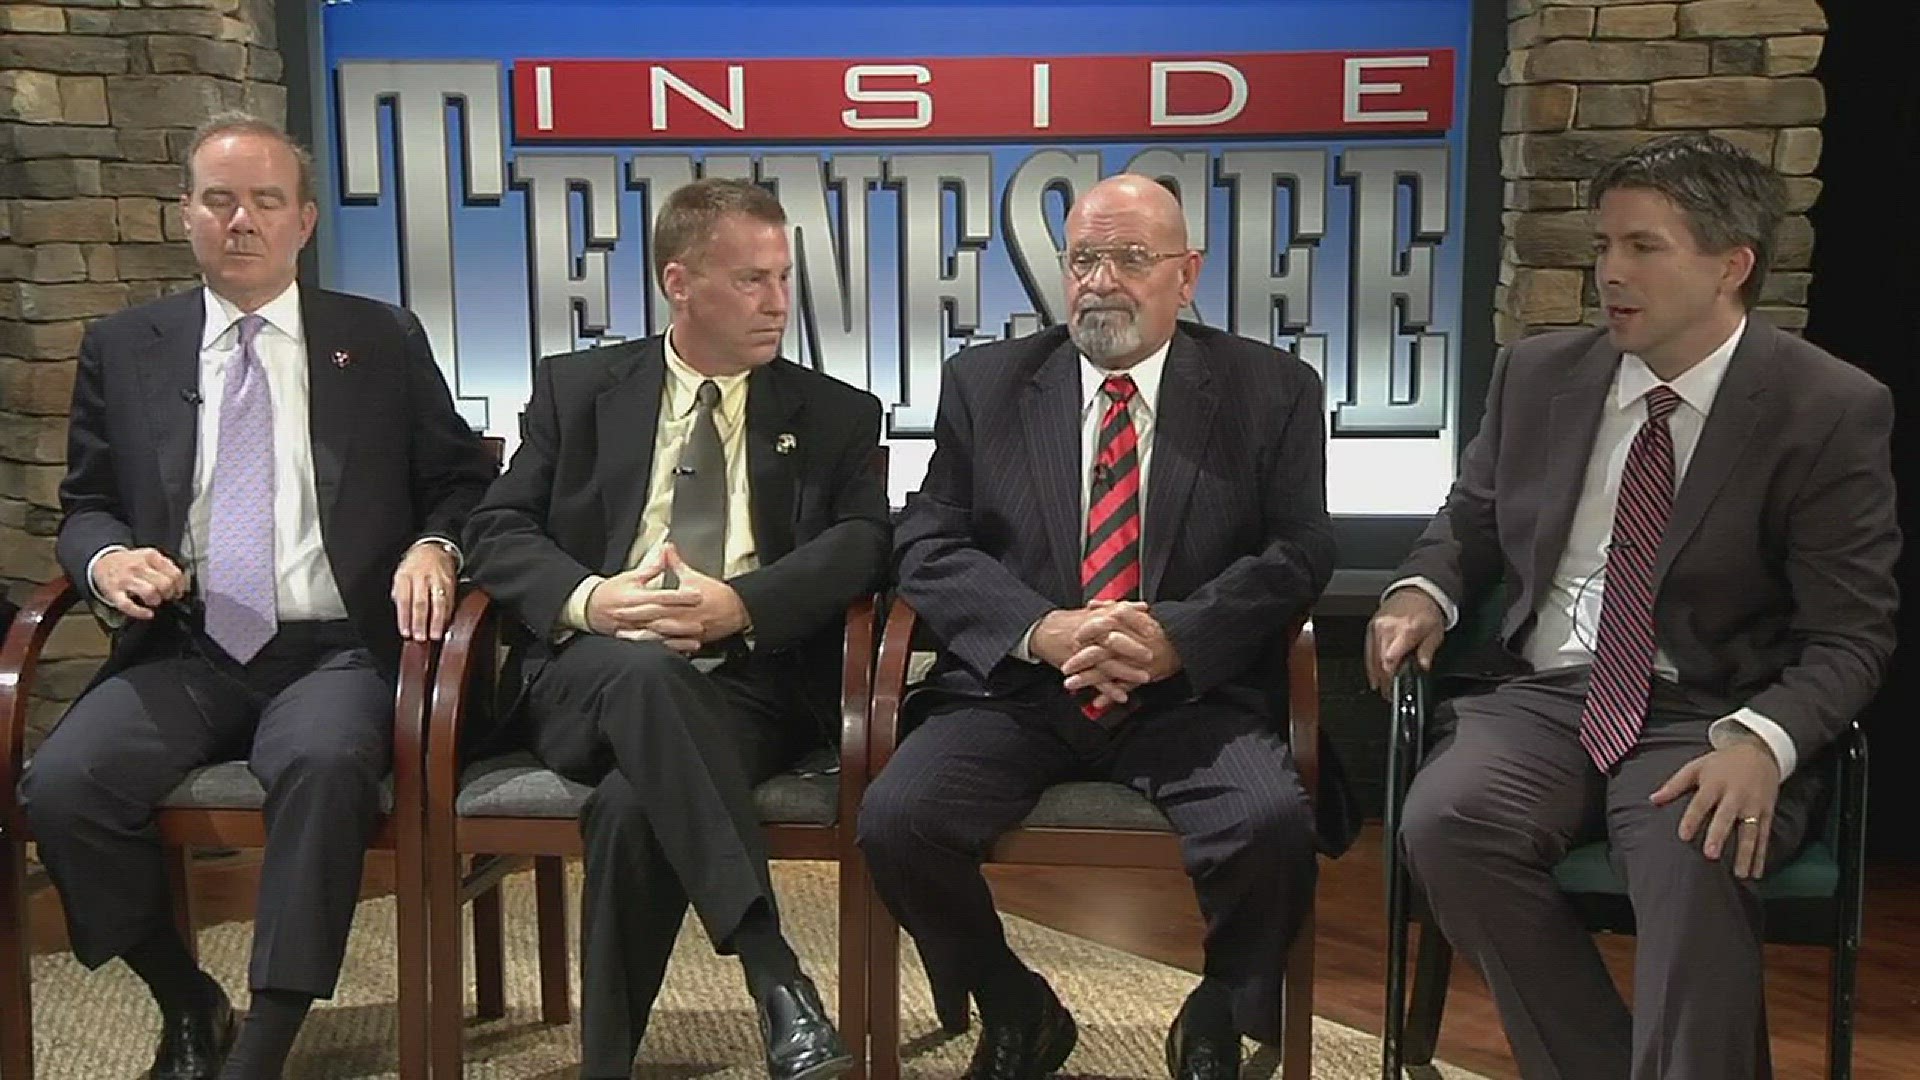 18th District candidates Martin Daniel, Bryan Dodson, Steve Hall and James Corcoran discuss their positions in the race.